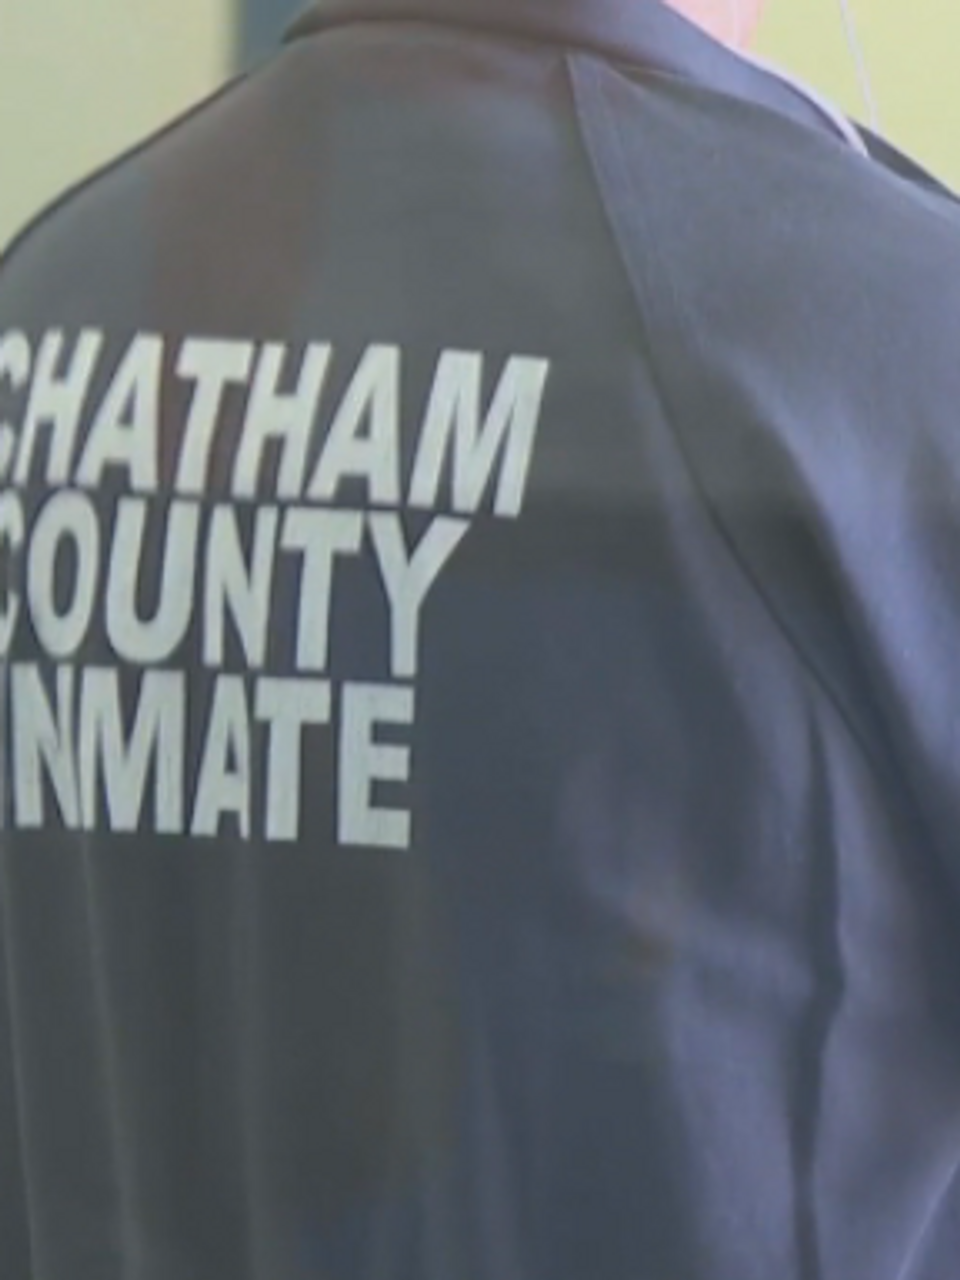 Chatham Co Judges Releasing Non Threatening Inmates To Prevent